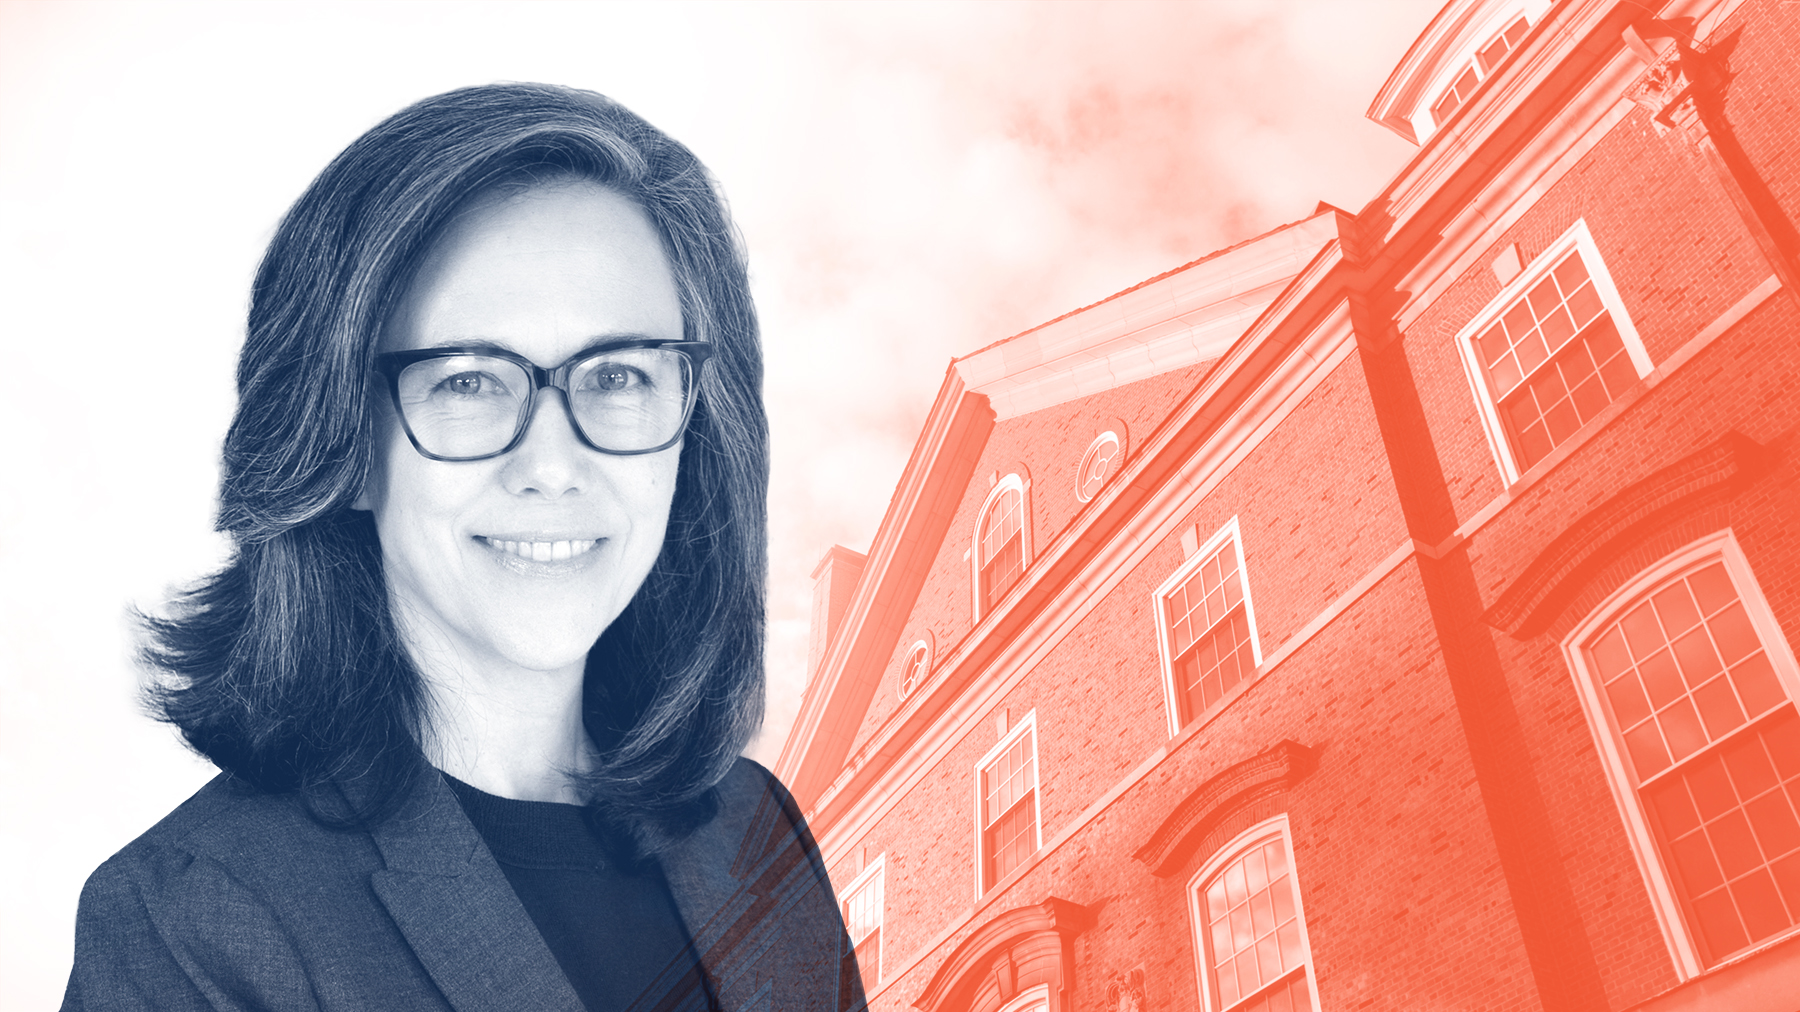 A photo of a white woman with shoulder length brown hair and glasses. The photo is altered to make her a blueish hue, with a library building in an orange hue in the background.